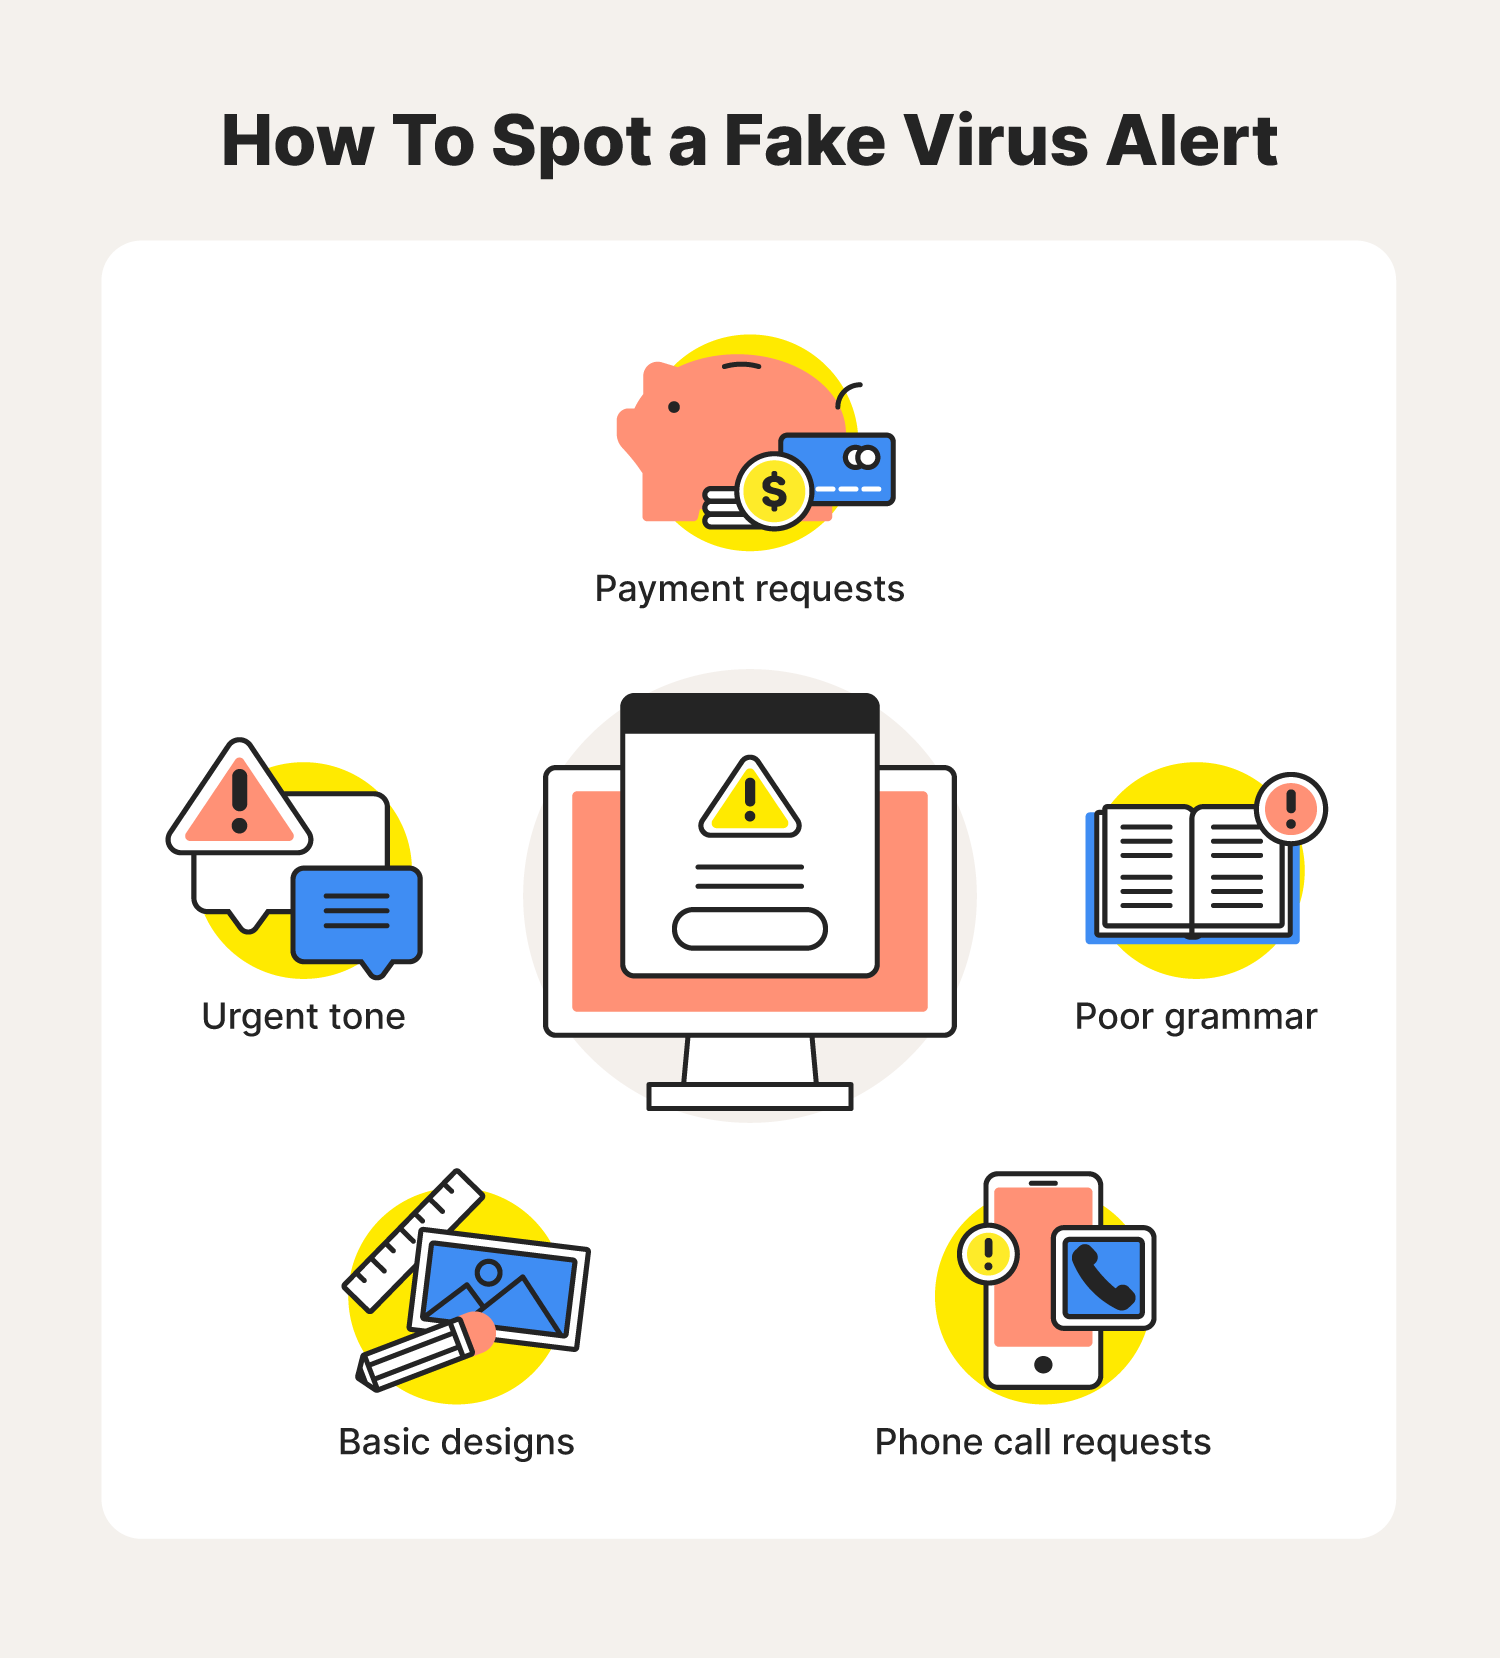 How to spot a fake virus